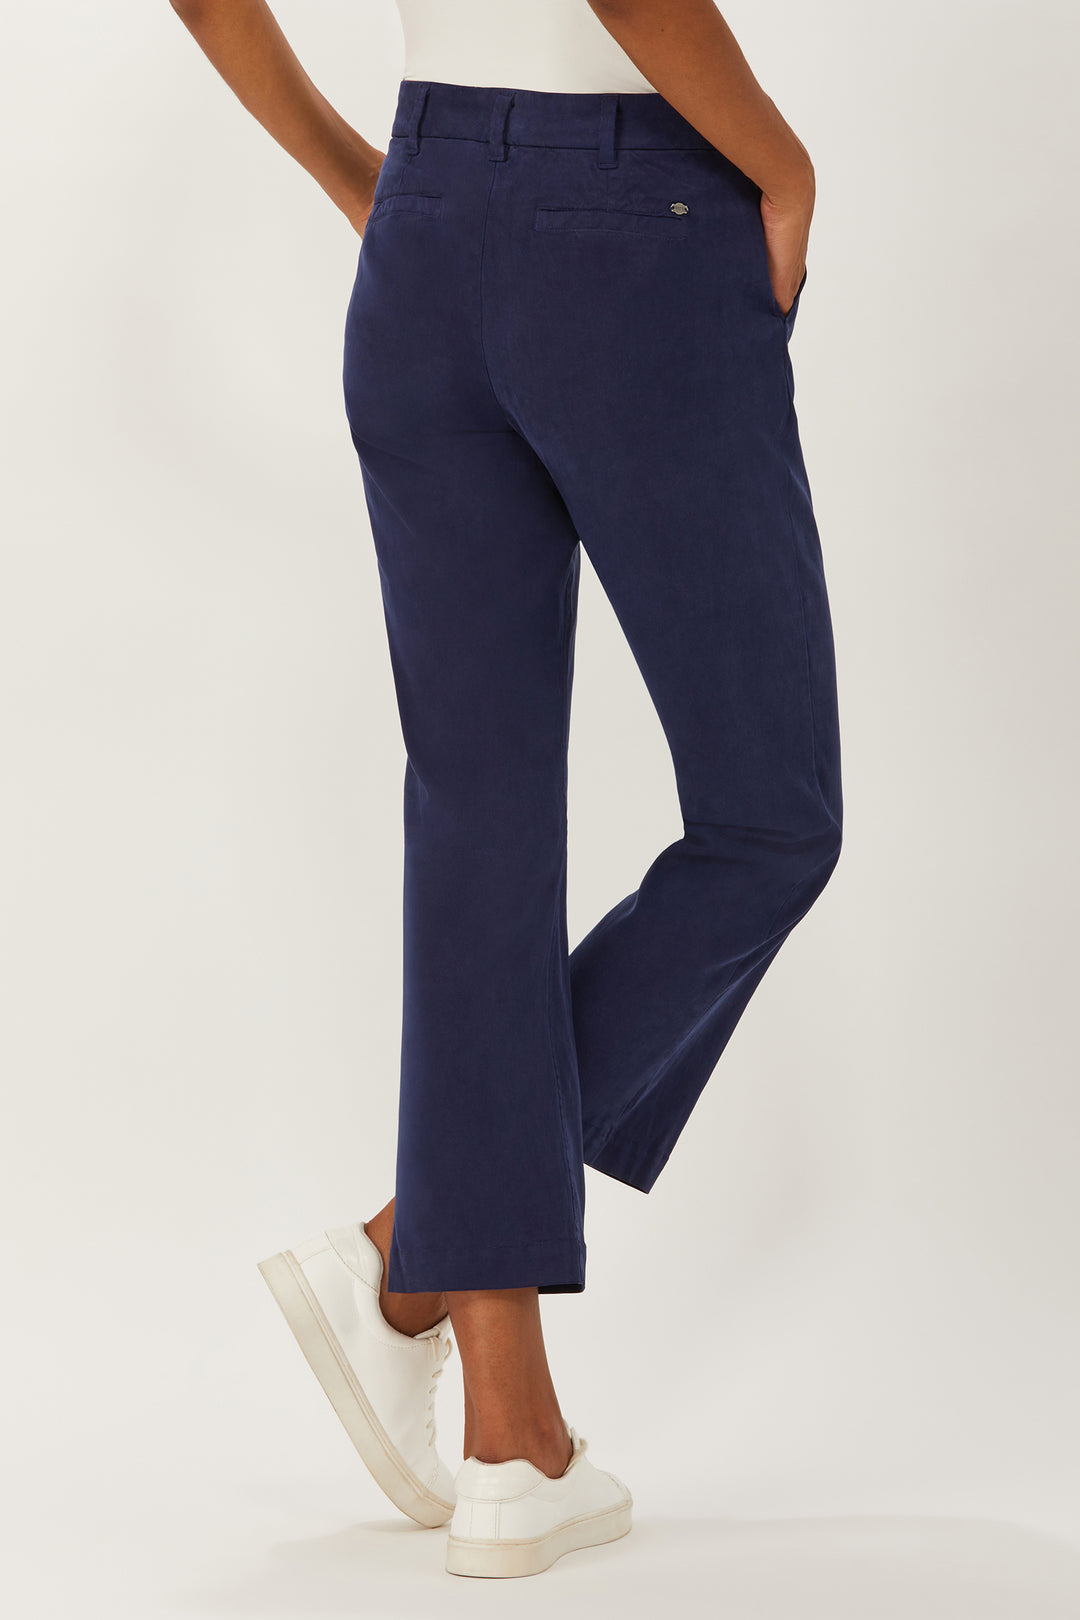 Stills Cropped Flare Pant - Navy